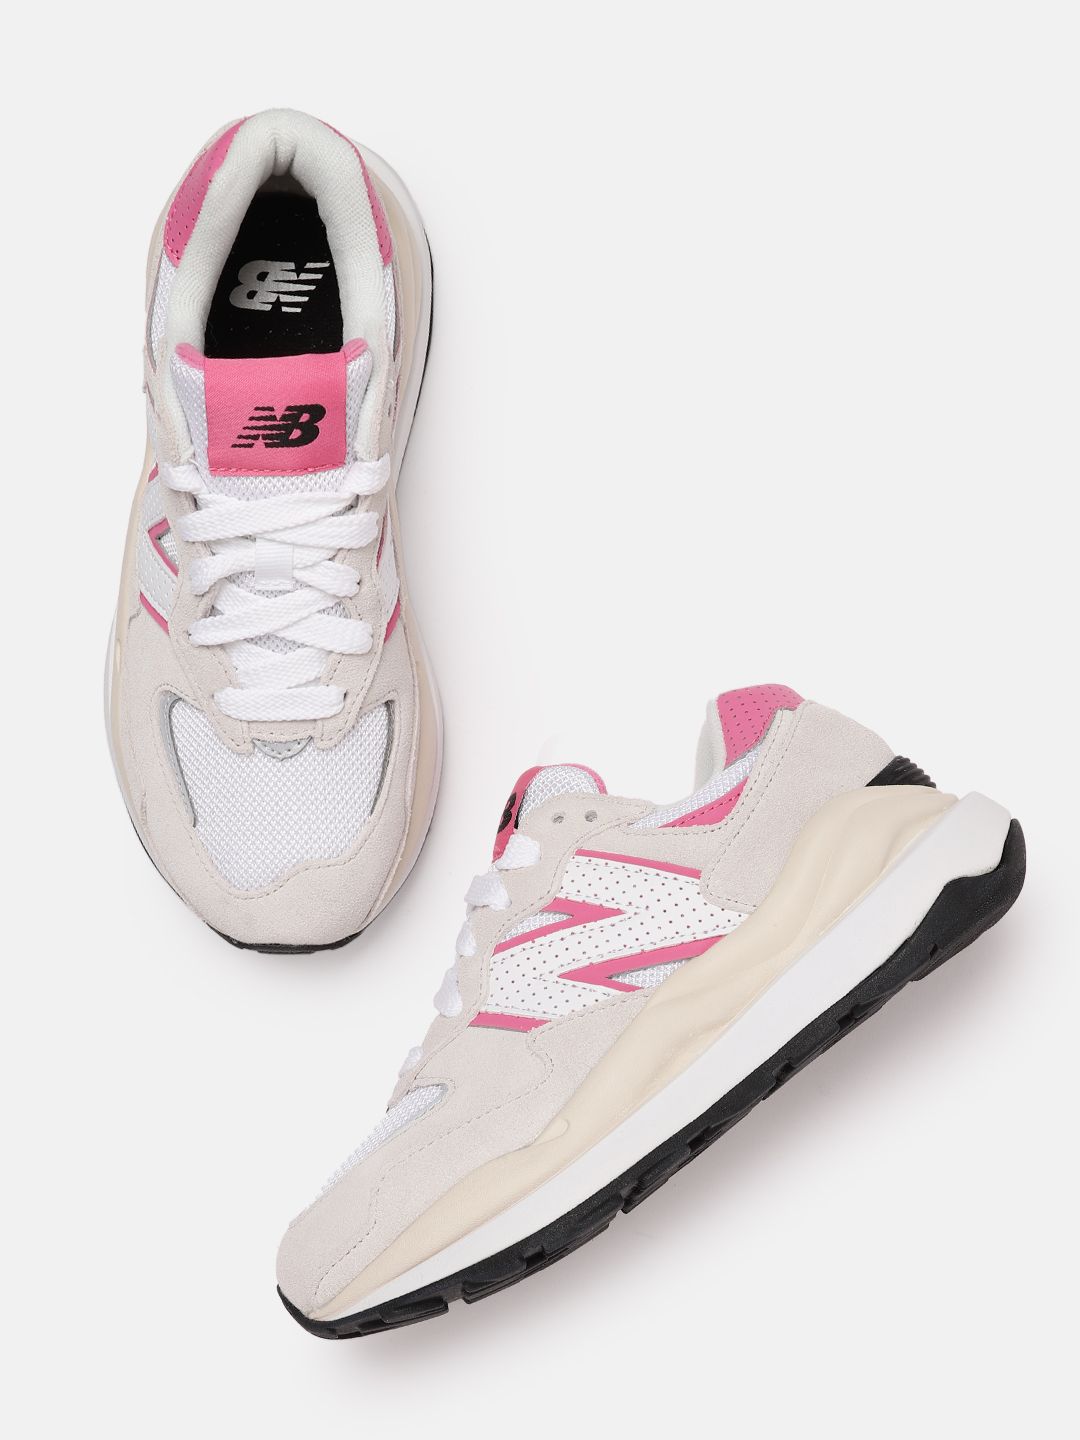 New Balance Women White Woven Design Suede Sneakers Price in India